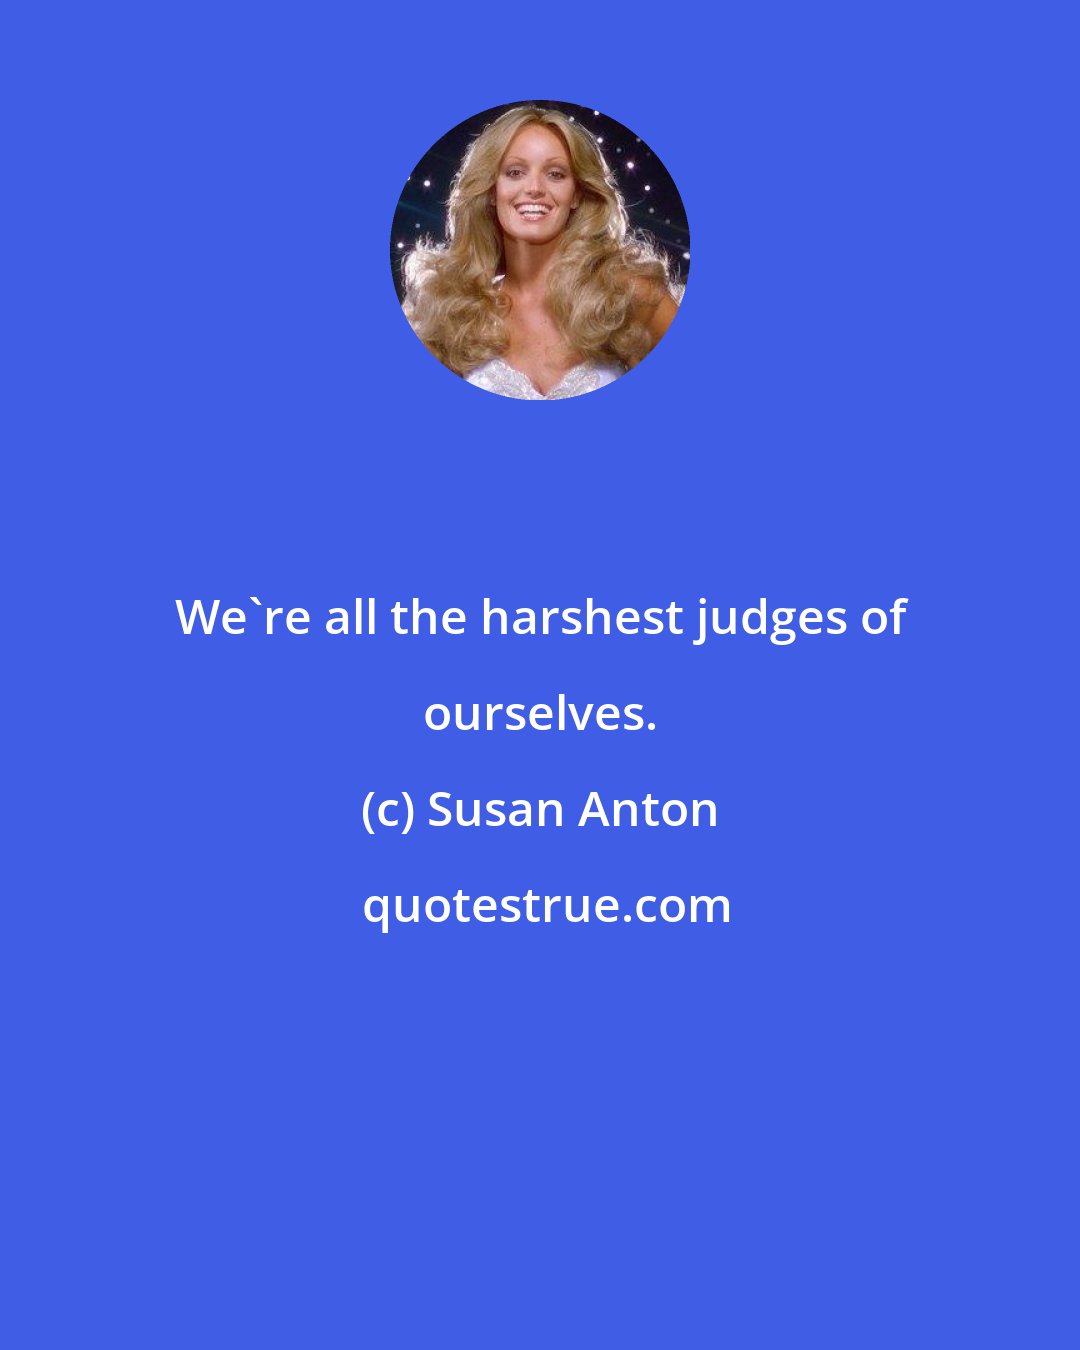 Susan Anton: We're all the harshest judges of ourselves.